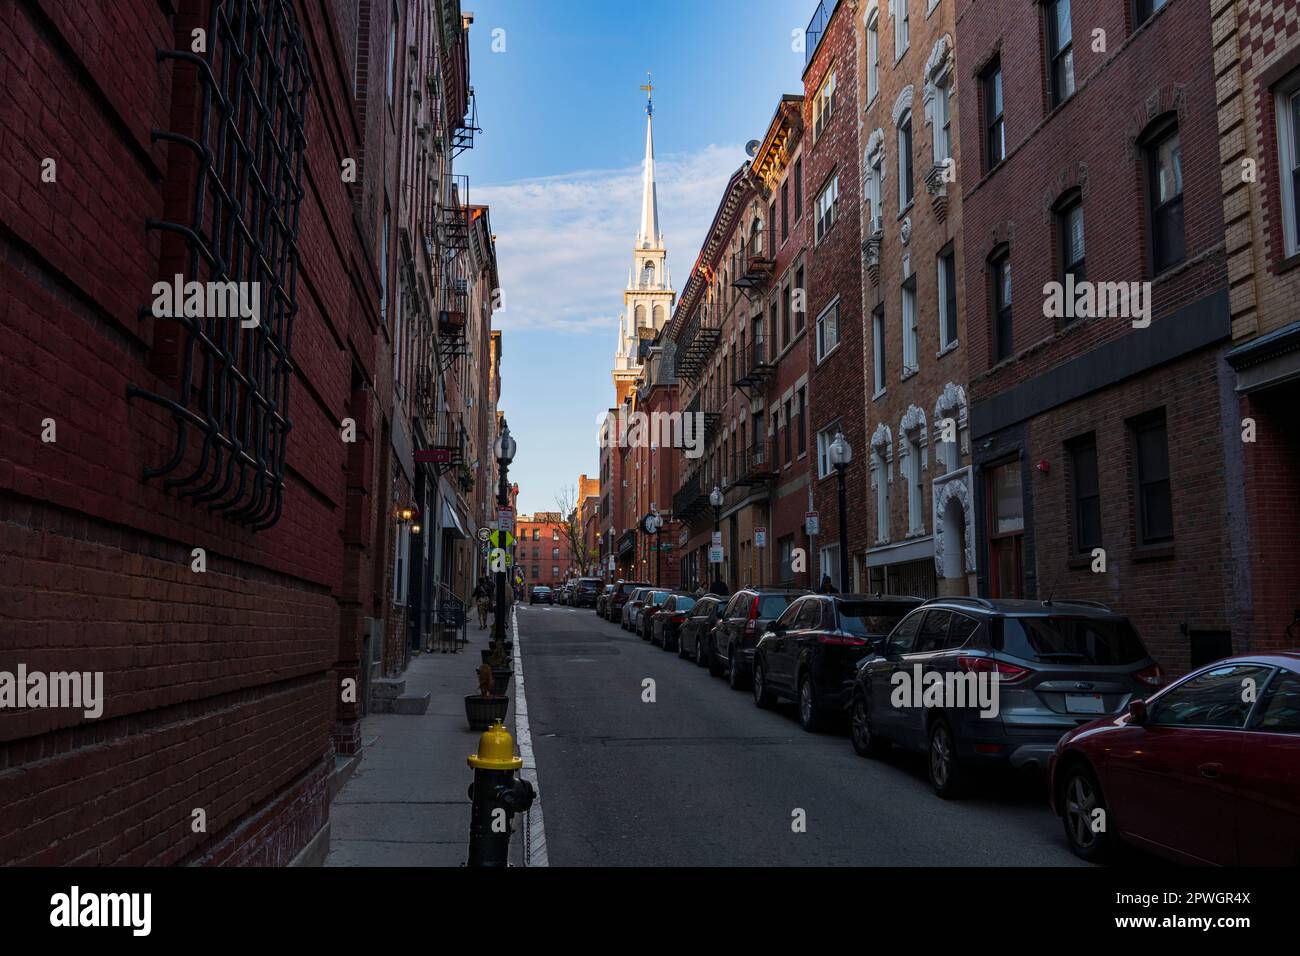 Brick wall buildings and Old Church view from streets of Boston Stock Photo